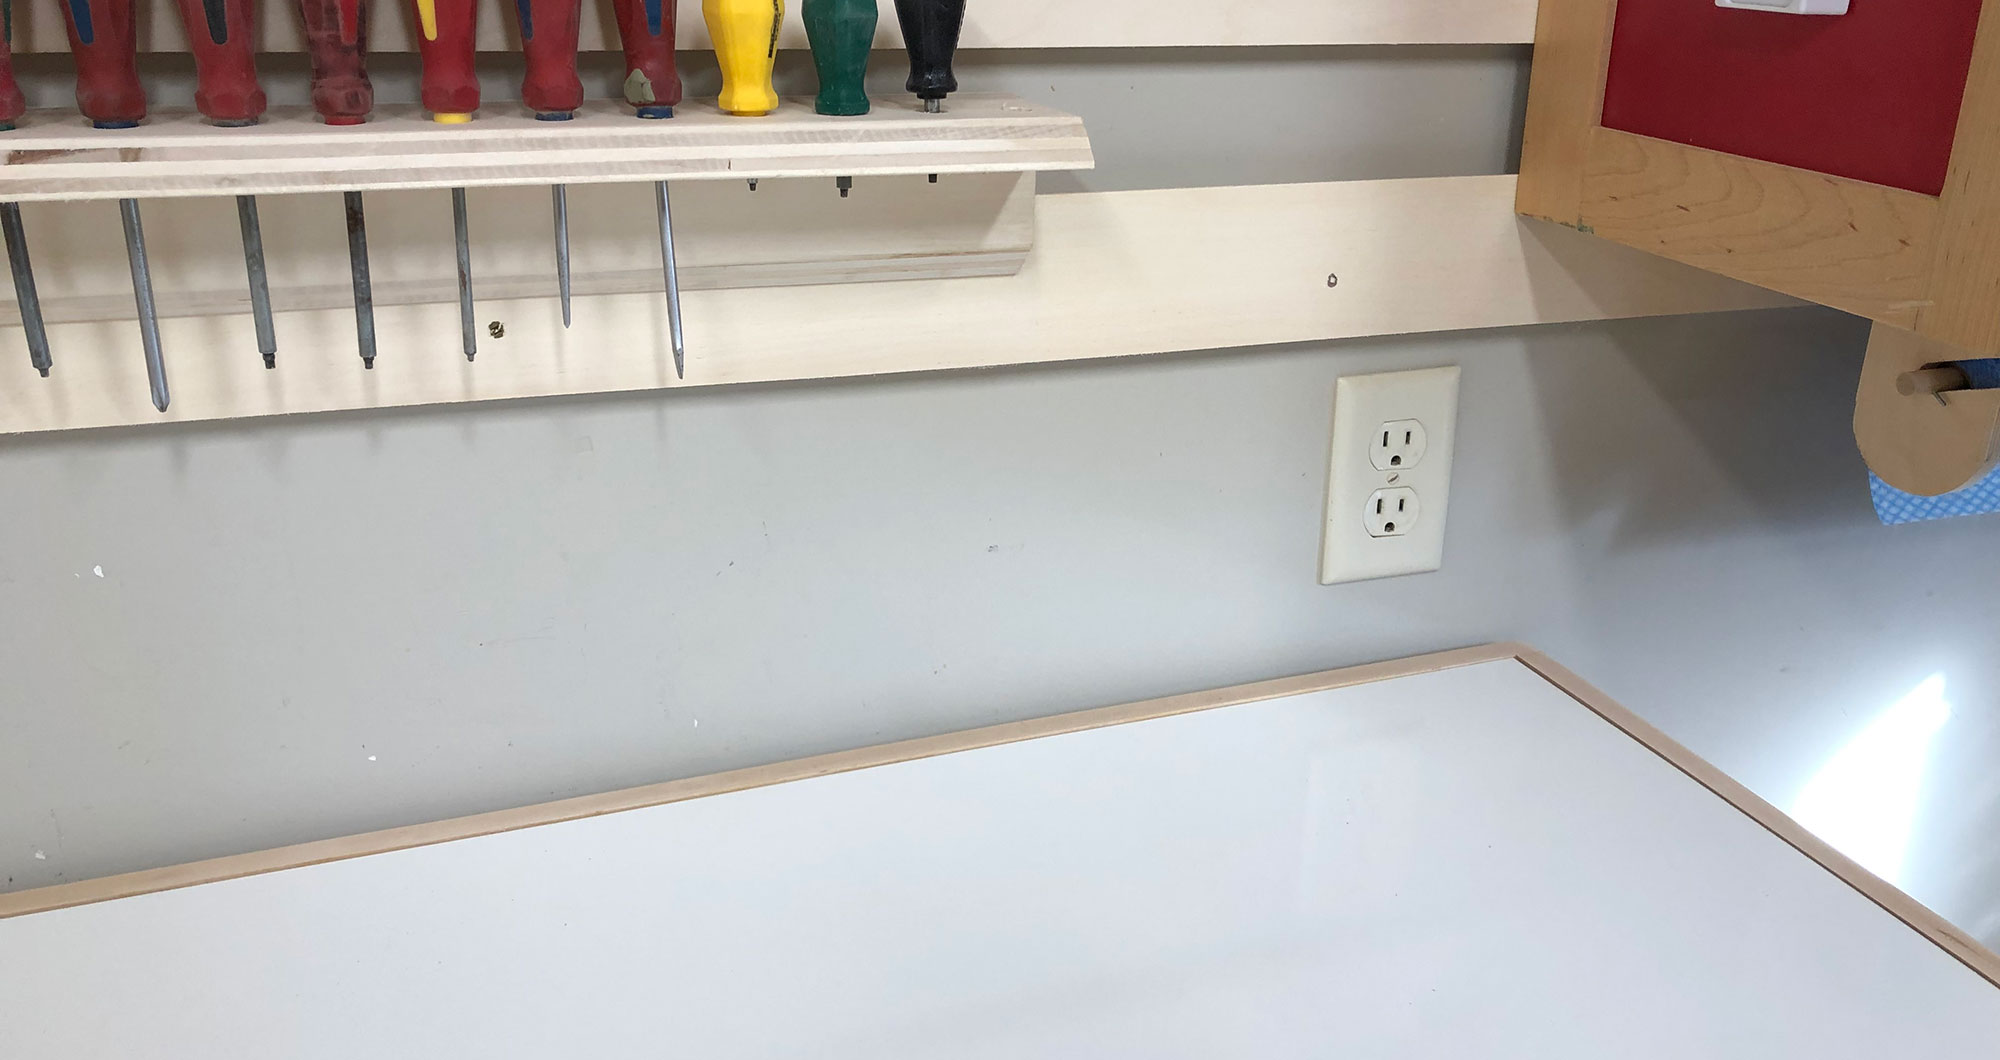 Outlets at bench level